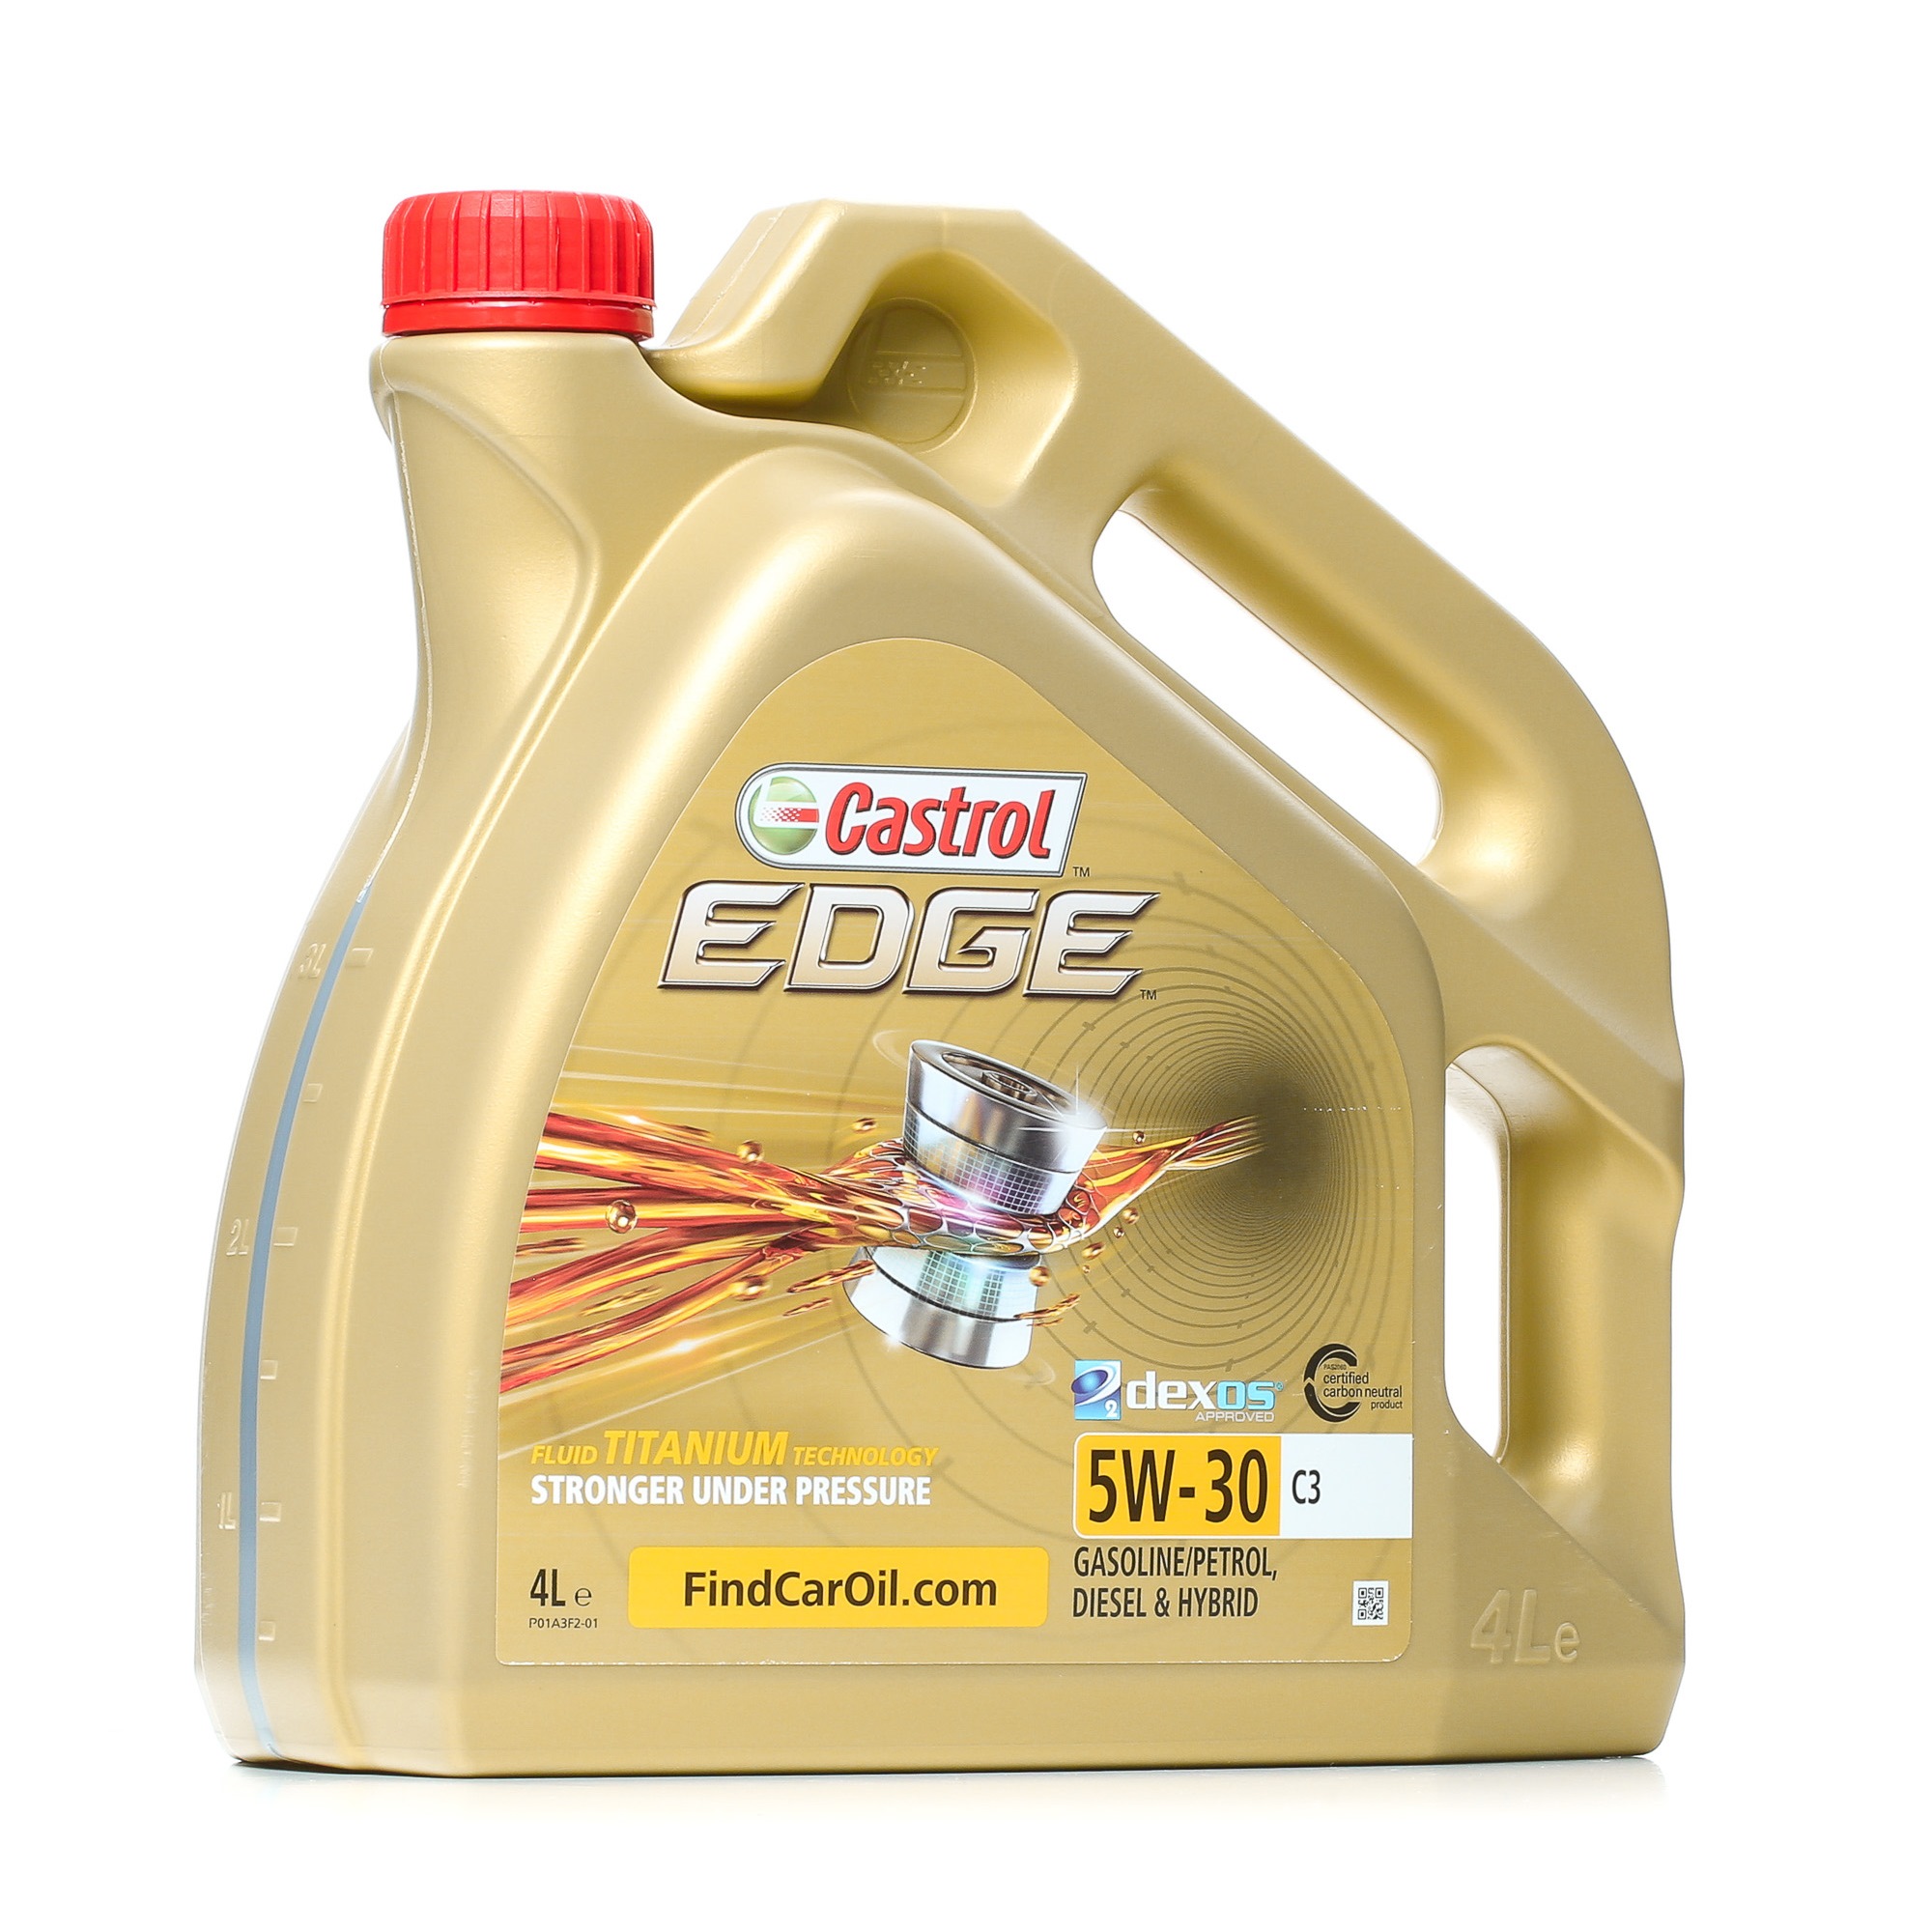 Toyota Engine oil CASTROL 5W-30 at a good price